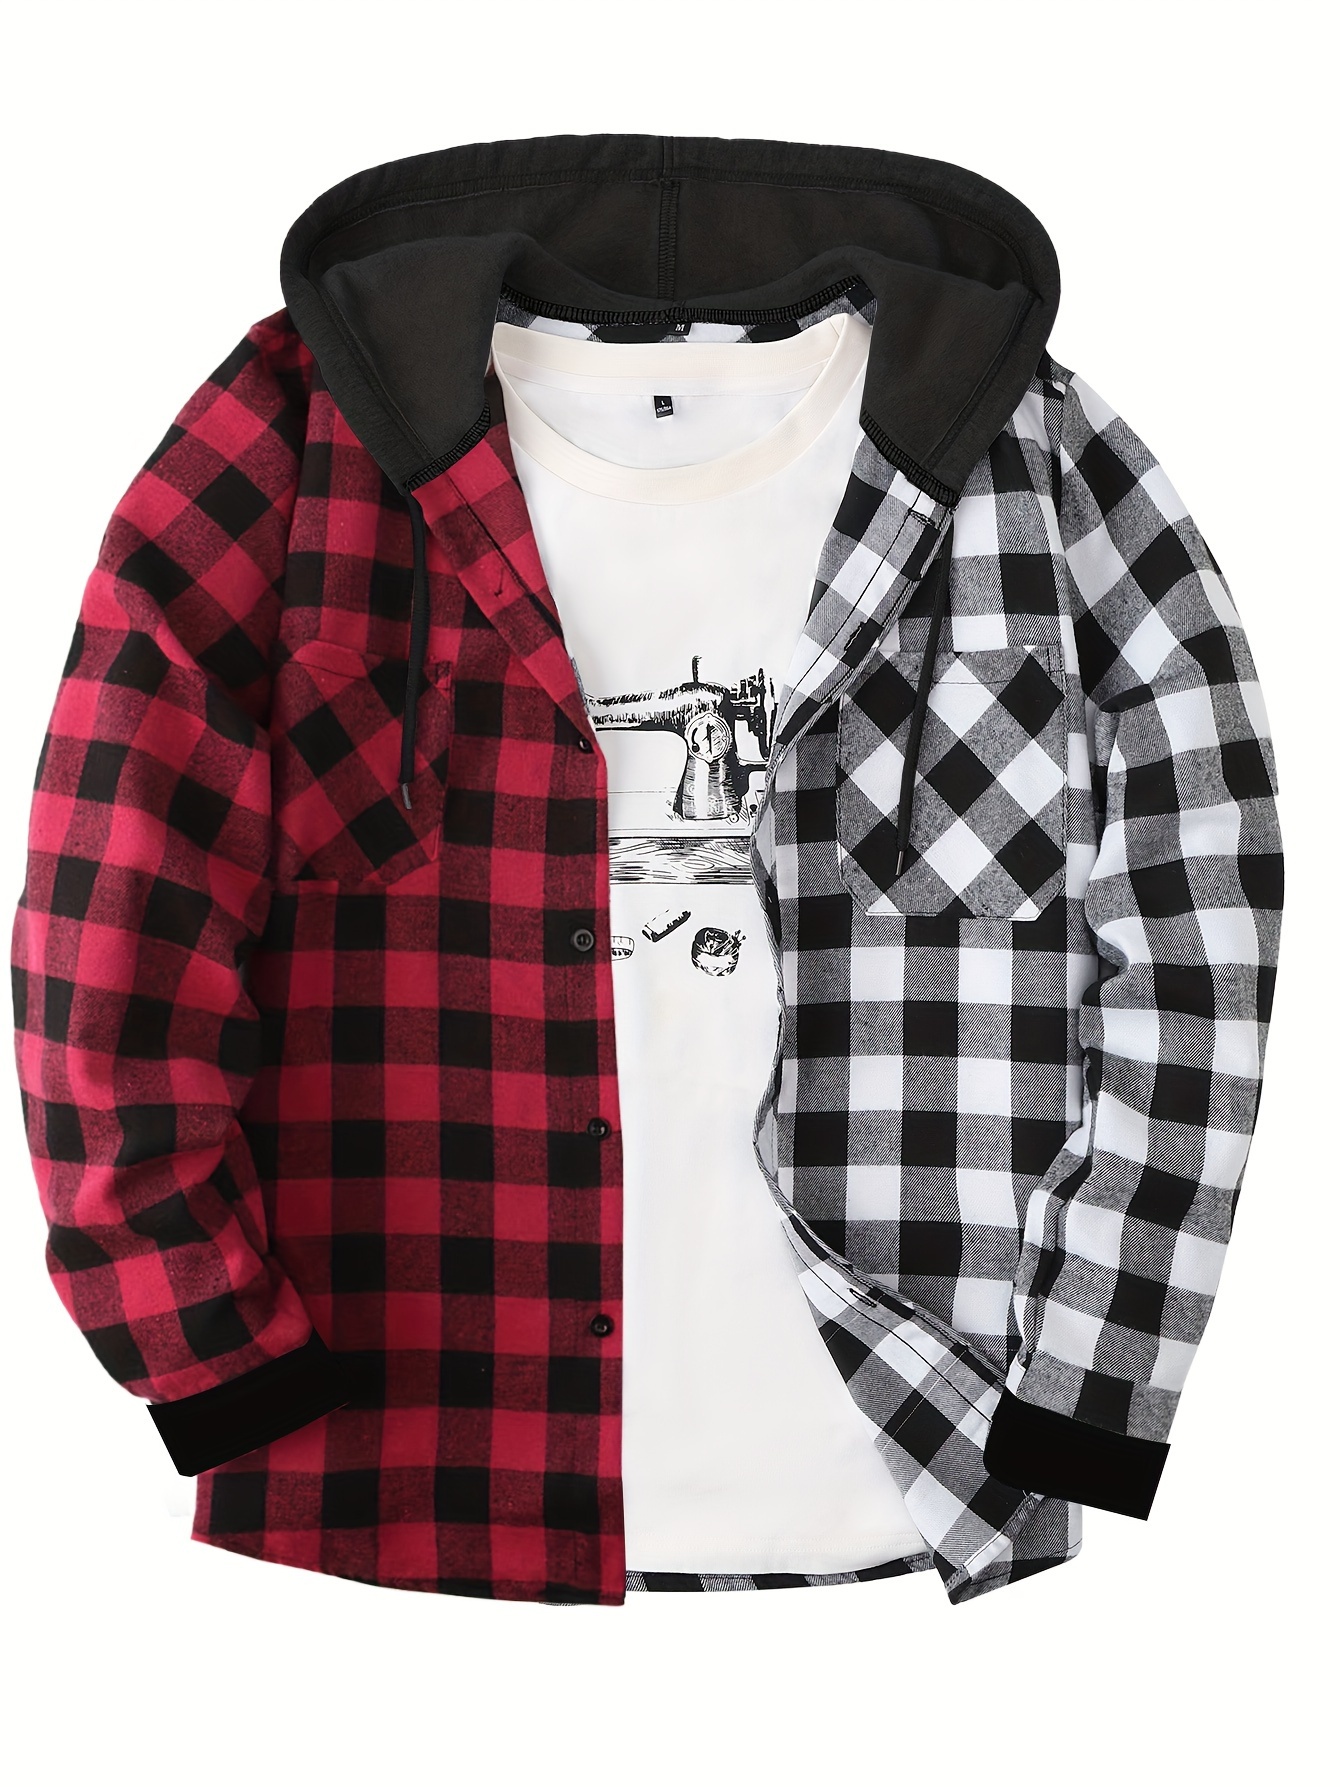 long sleeve casual regular fit button up hooded shirts jacket plaid shirt coat for men details 10